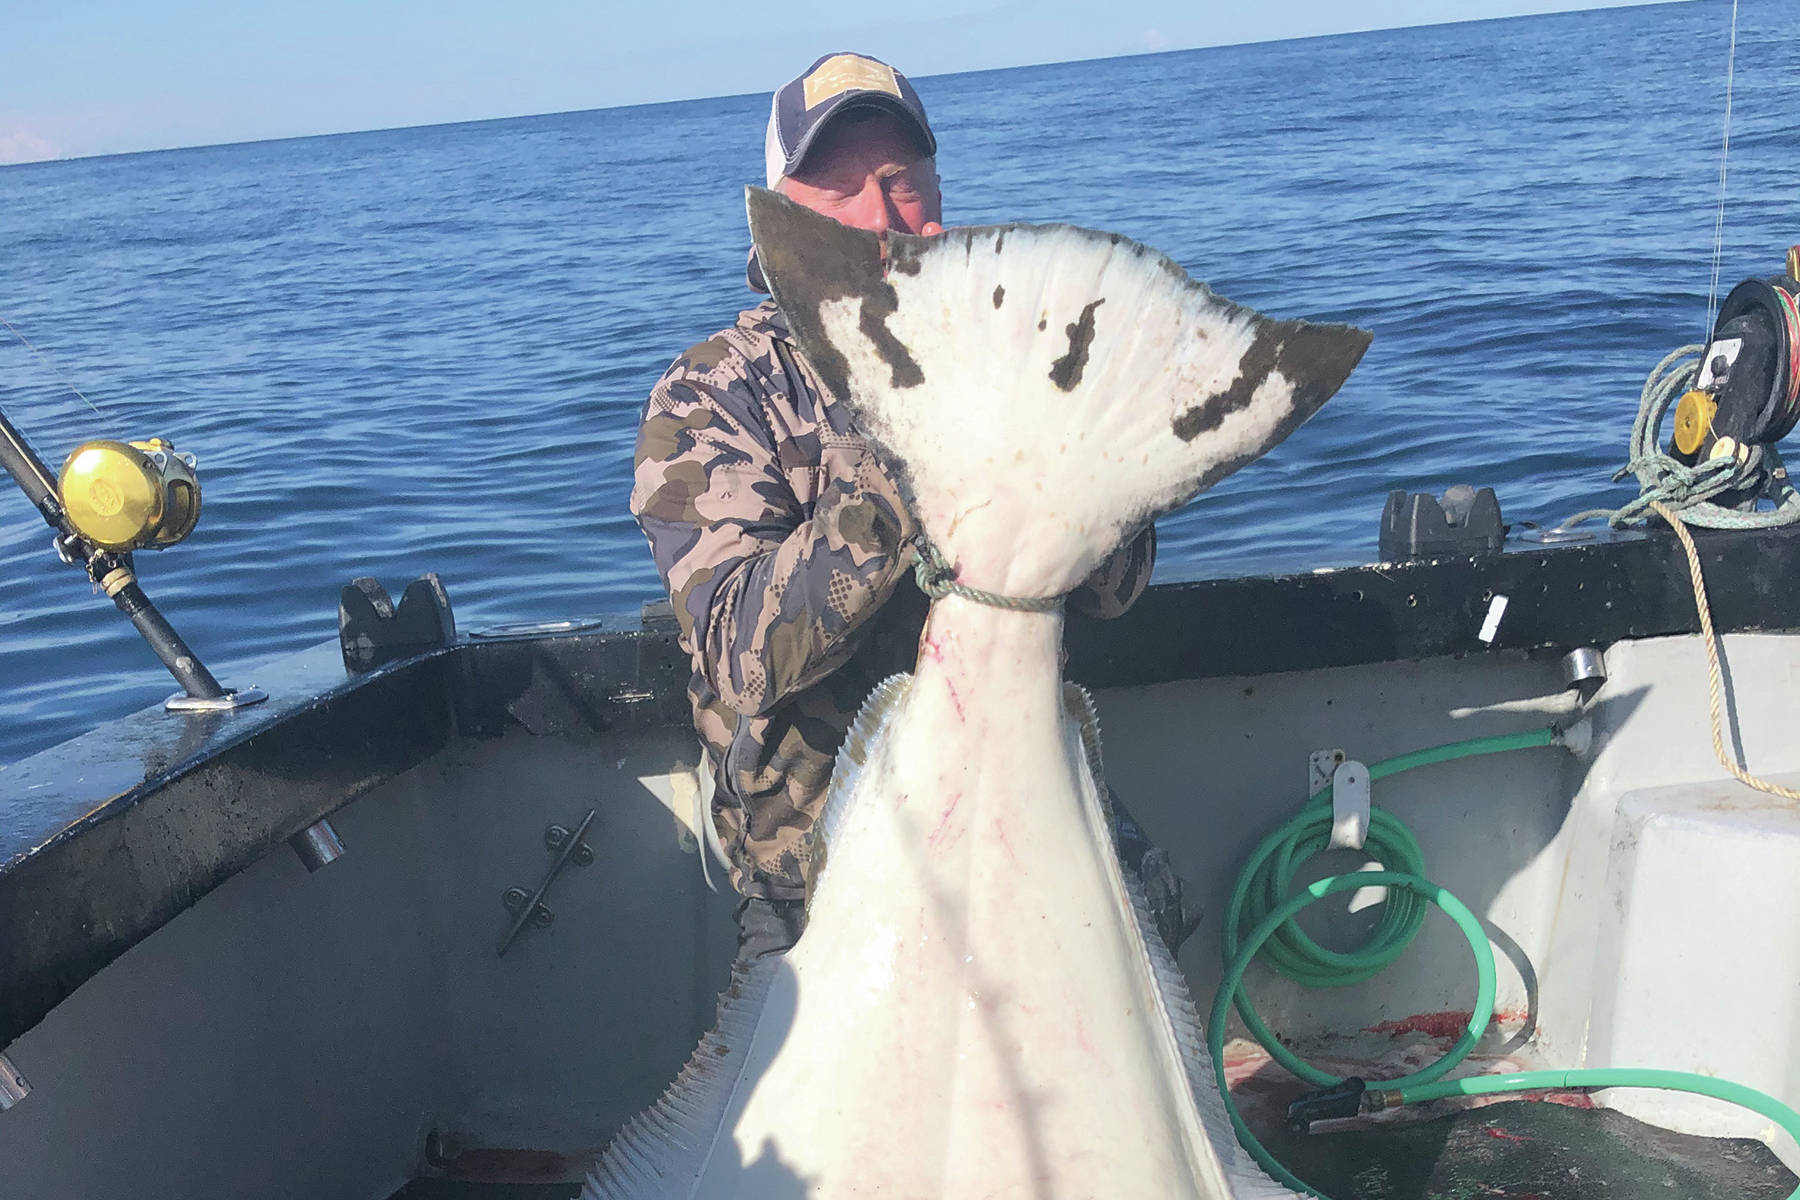 Chris Giegerich holds a monster halibut he caught on the F/V Huntress with Capt. Josh Brooks on May 3, 2020, while fishing in lower Cook Inlet with his family. (Photo courtesy of Joleen Brooks, F/V Huntress)